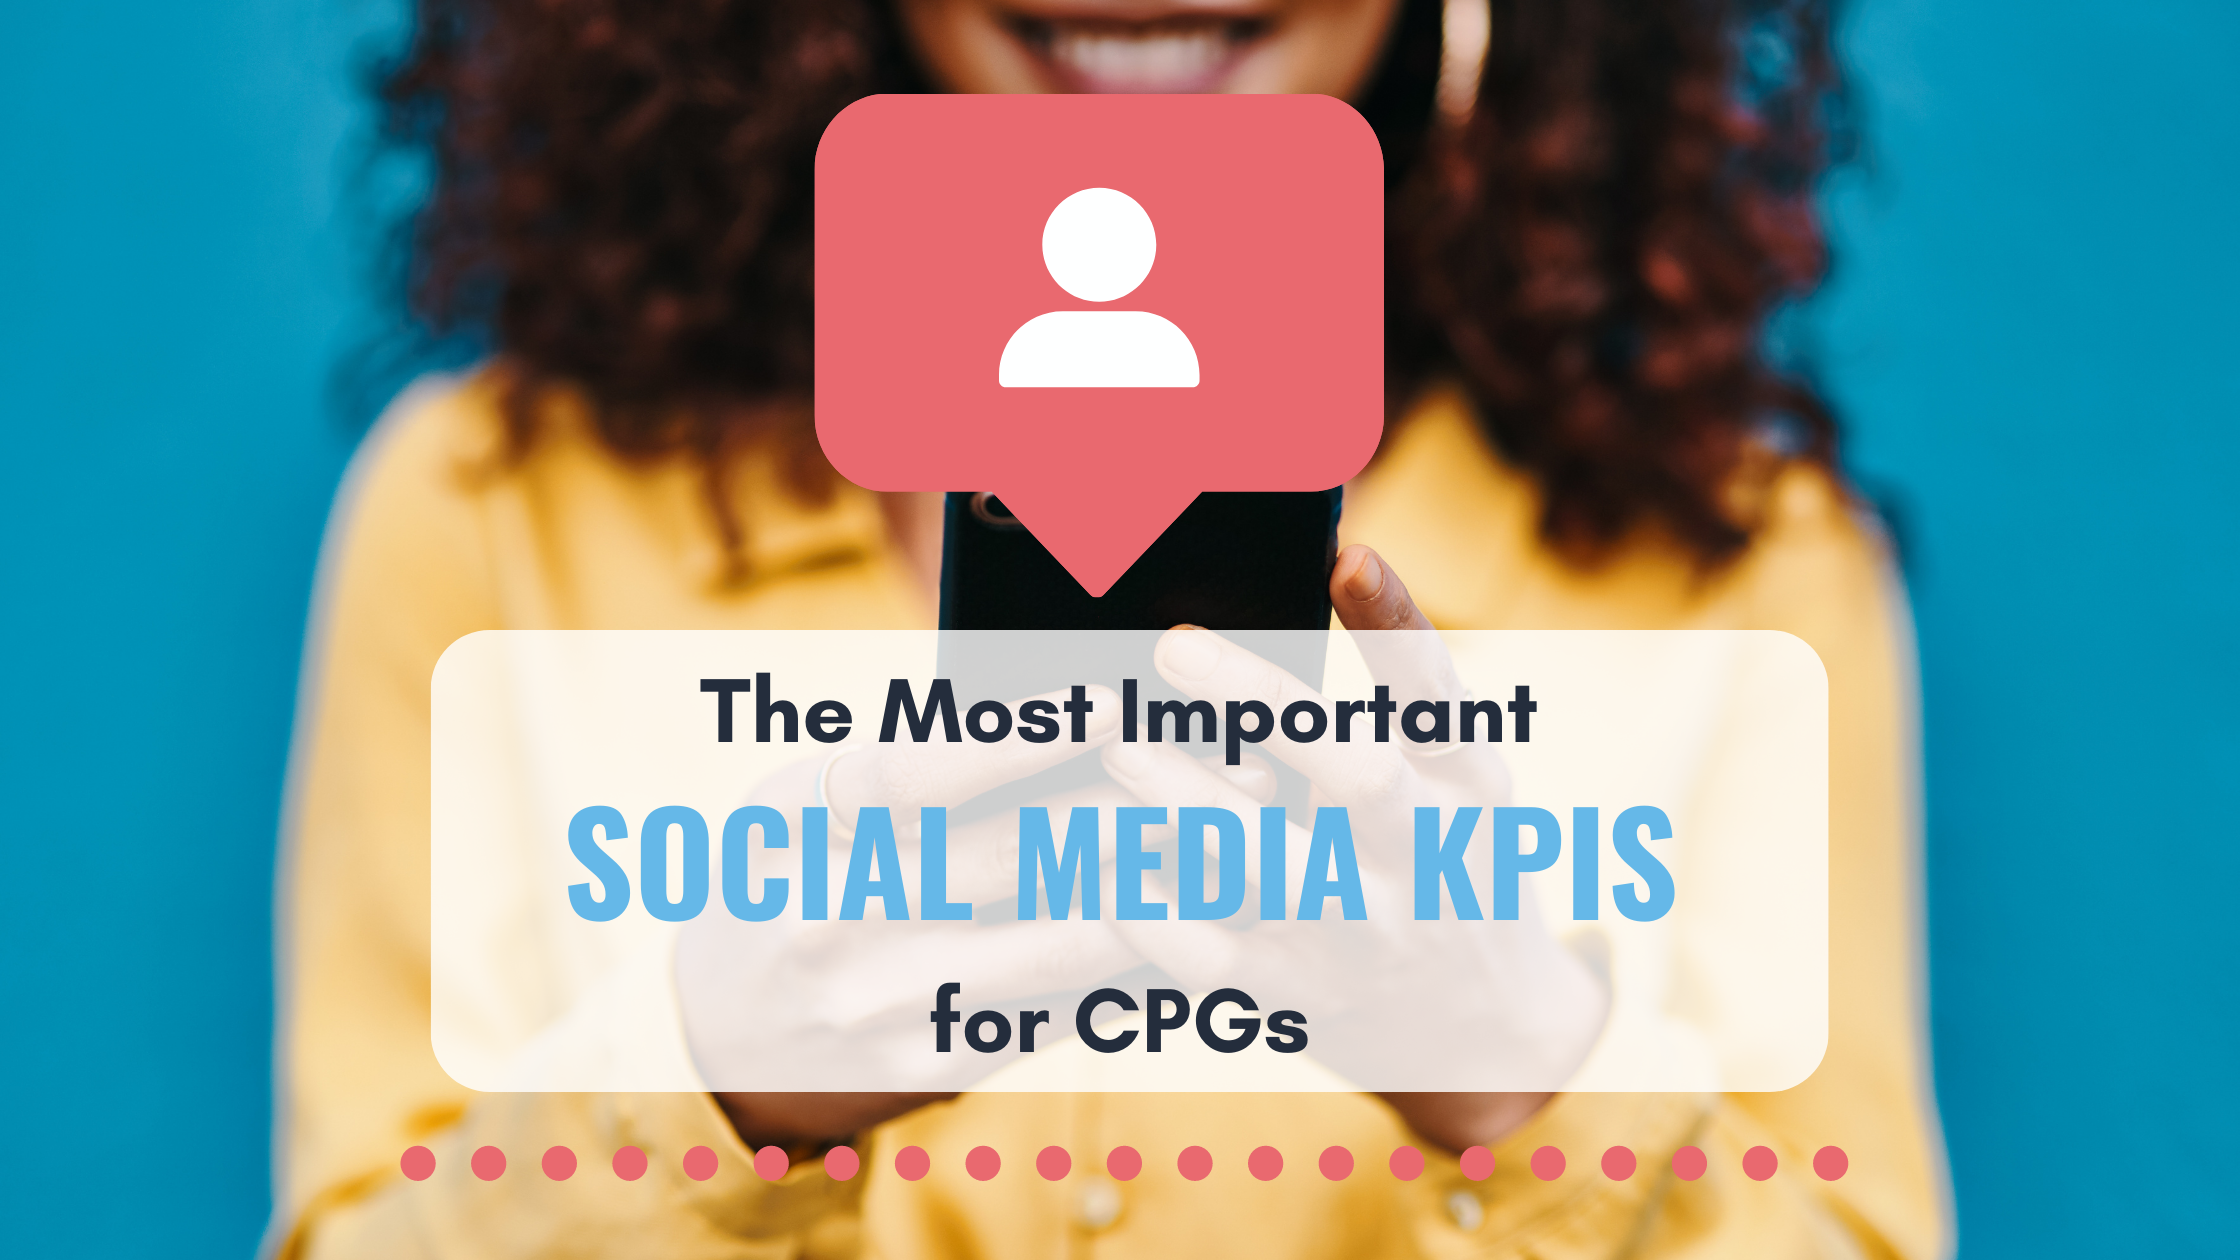 The Most Important Social Media KPIs for CPGs